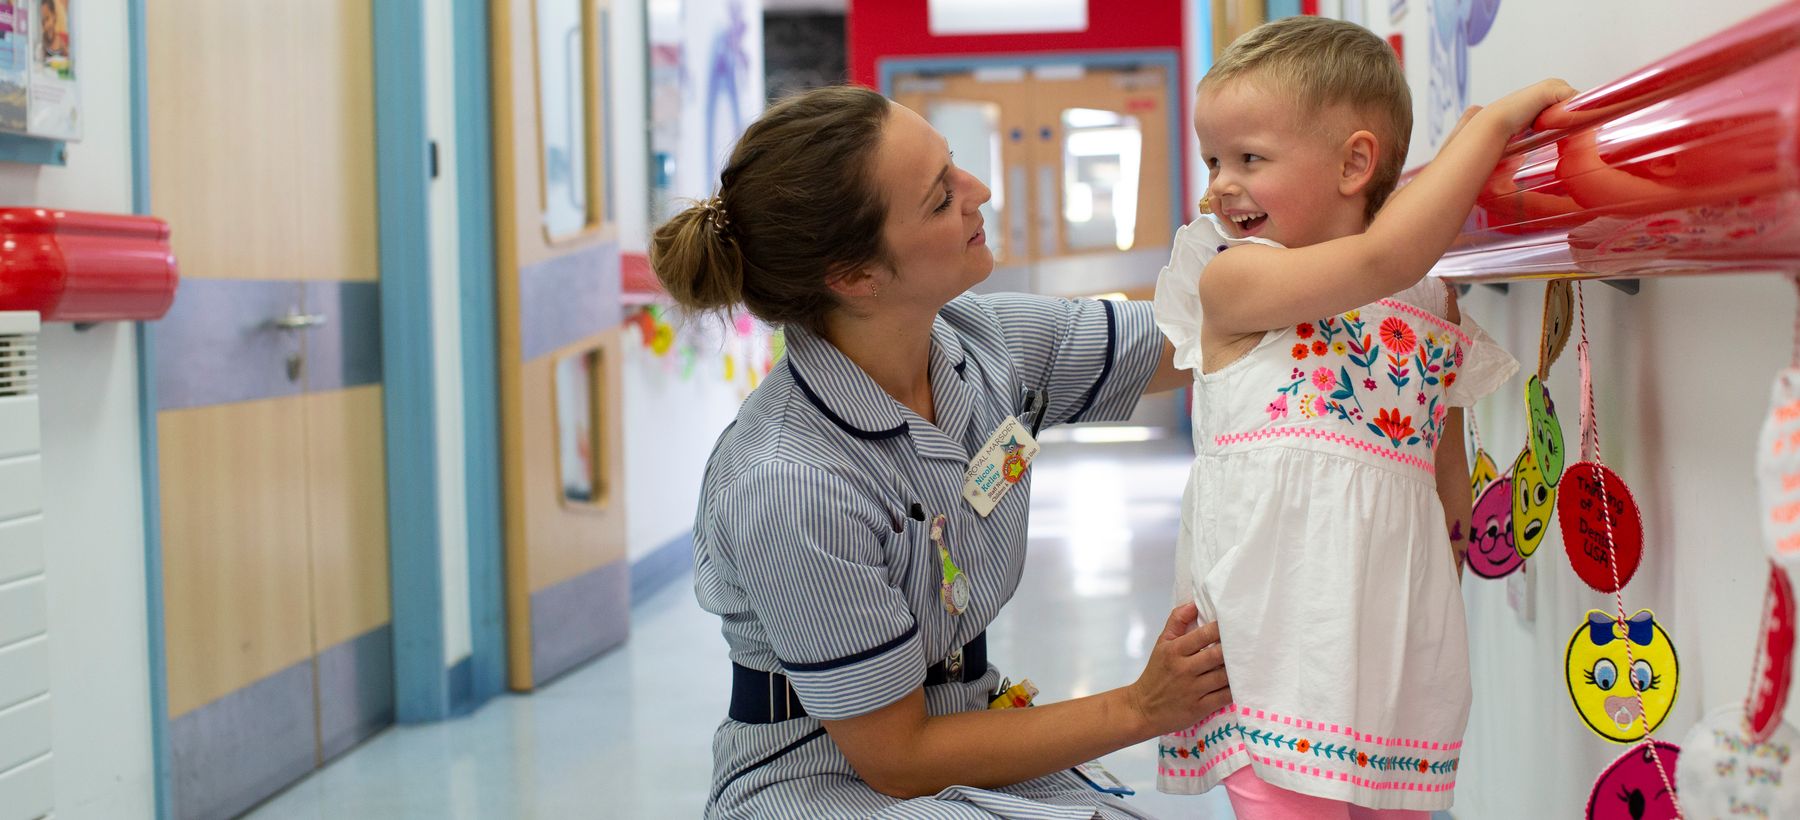 Patient Elodie Macey with a nurse